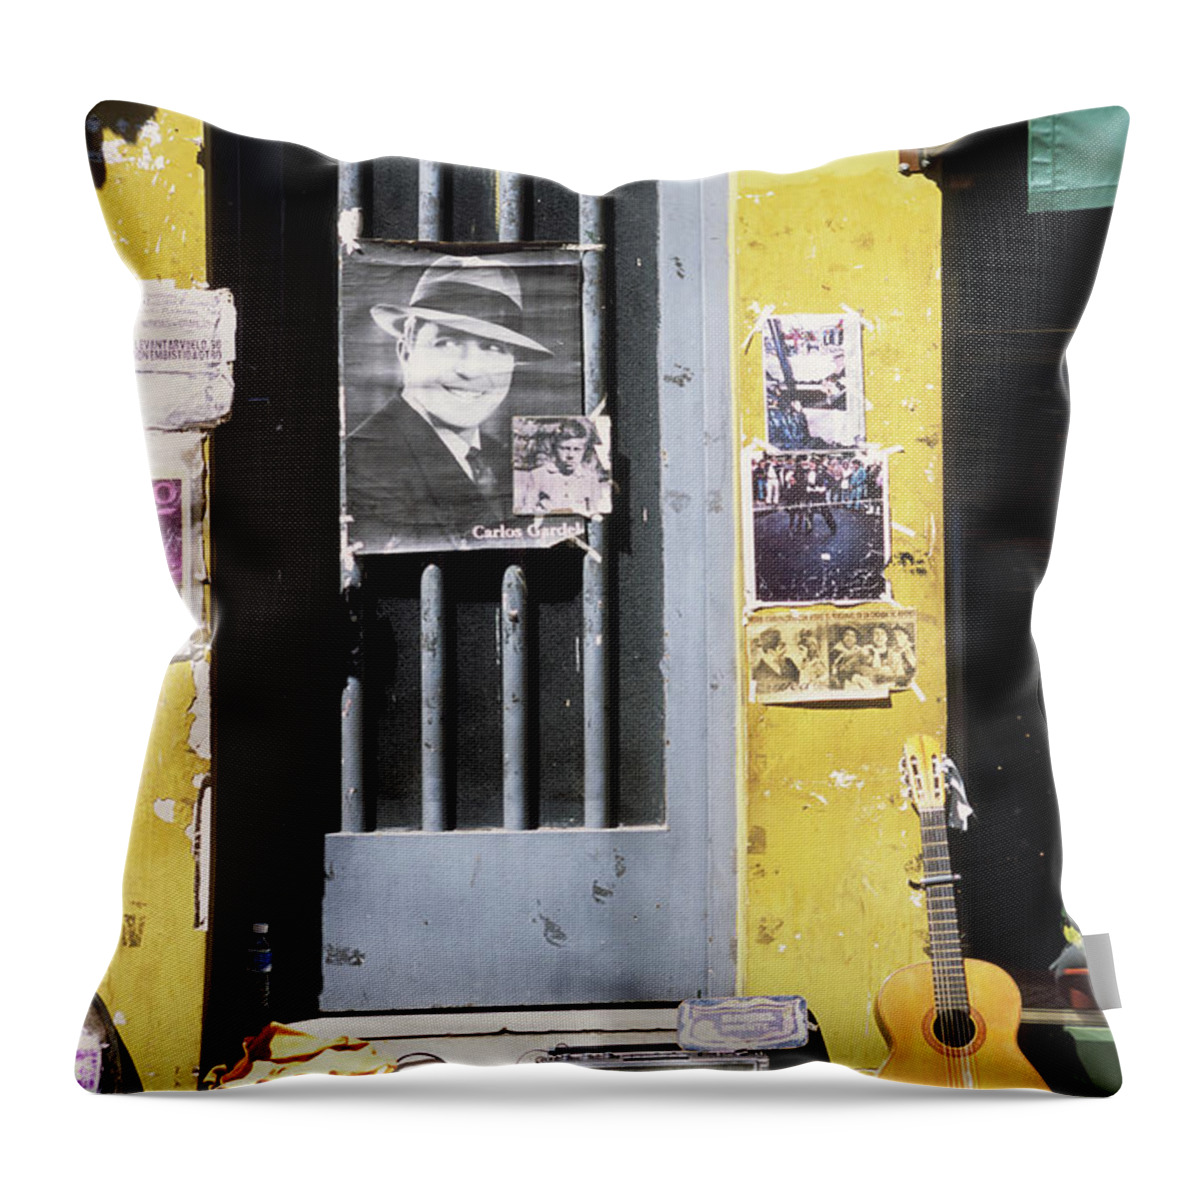 Argentina Throw Pillow featuring the photograph A Tribute to Carlos Gardel by James Brunker